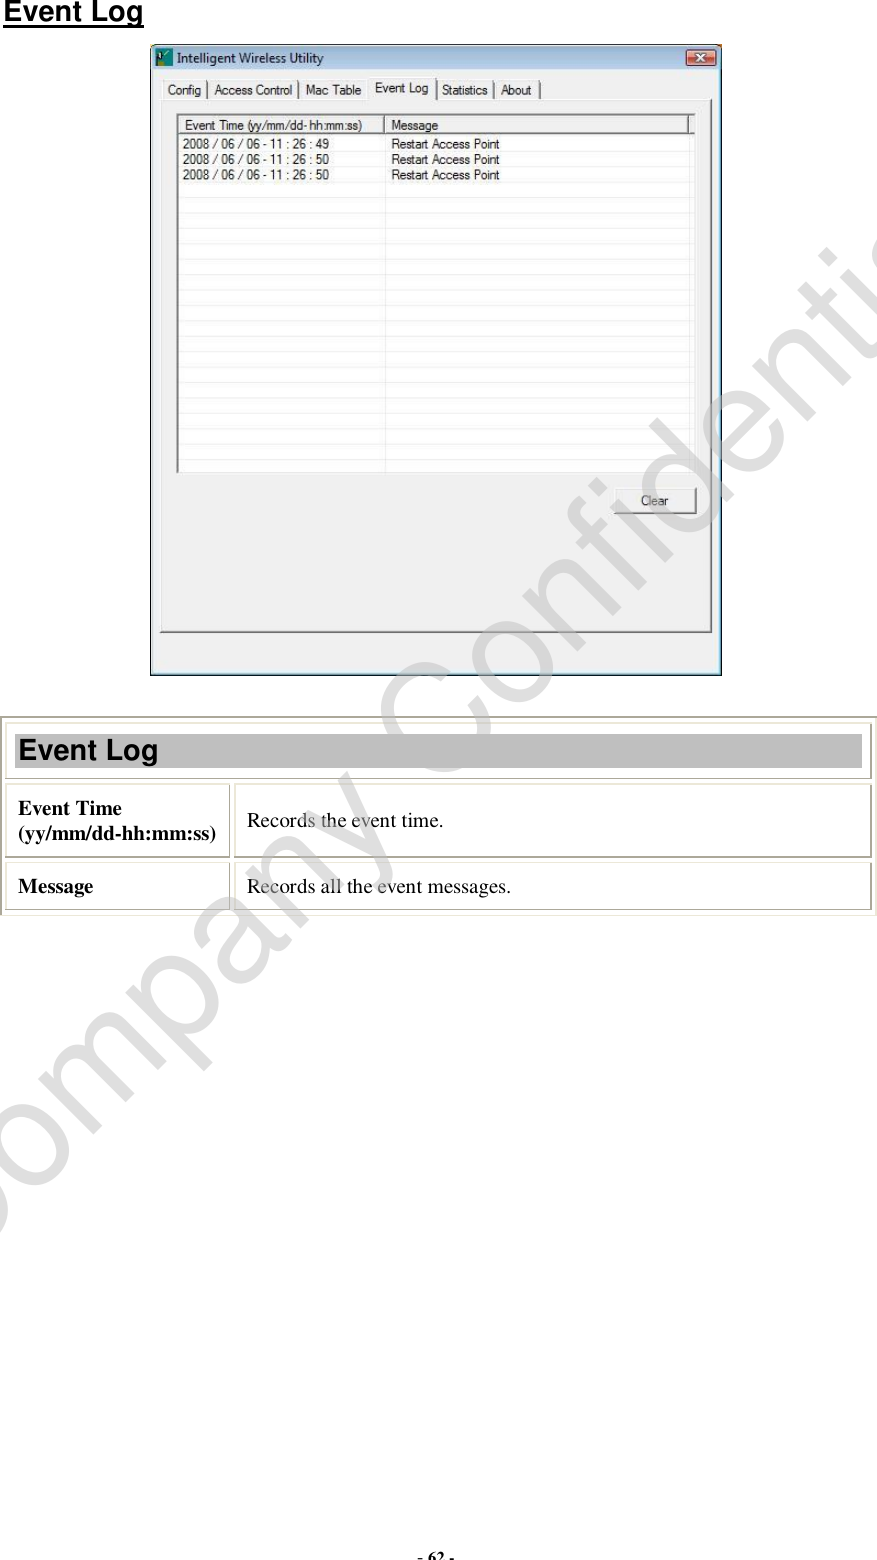  - 62 - Event Log   Event Log Event Time (yy/mm/dd-hh:mm:ss) Records the event time. Message  Records all the event messages.    Company Confidential